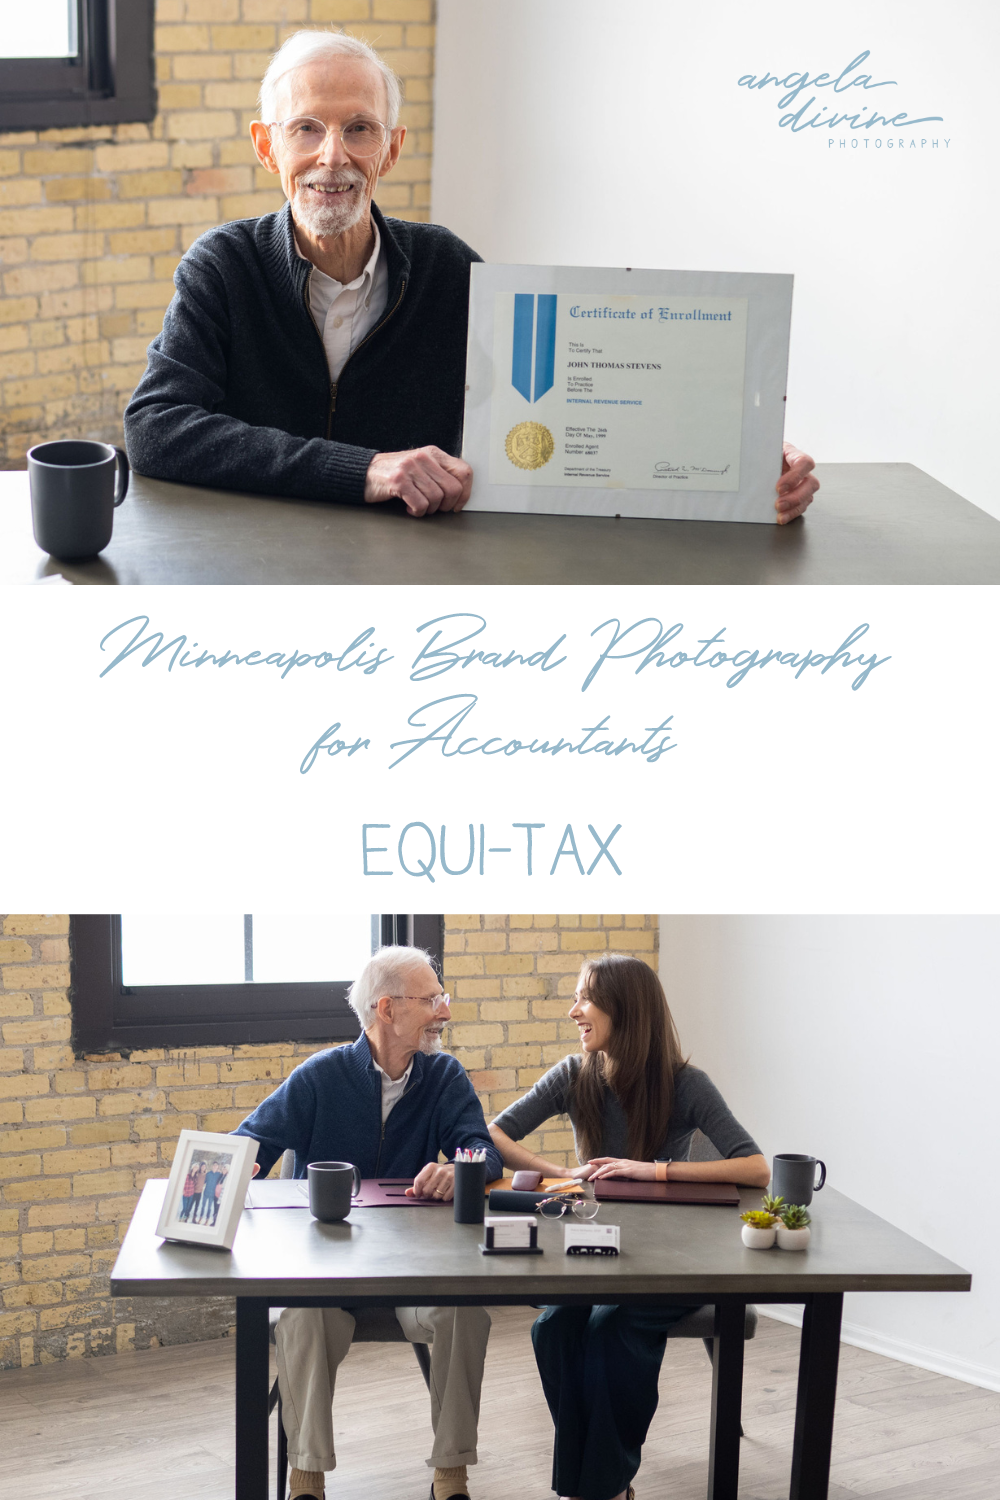 These pictures are from a brand photography session for Equi-Tax, a small, family-owned accounting firm in MN. They pride themselves on providing their clients with flexibility and a sense of familiarity that only small businesses can deliver. Visit the blog for more from their branding session. | Angela Divine Photography | Minneapolis wedding + brand photographer | #branding #brandphotography #personalbrand #minnesota #smallbusiness 